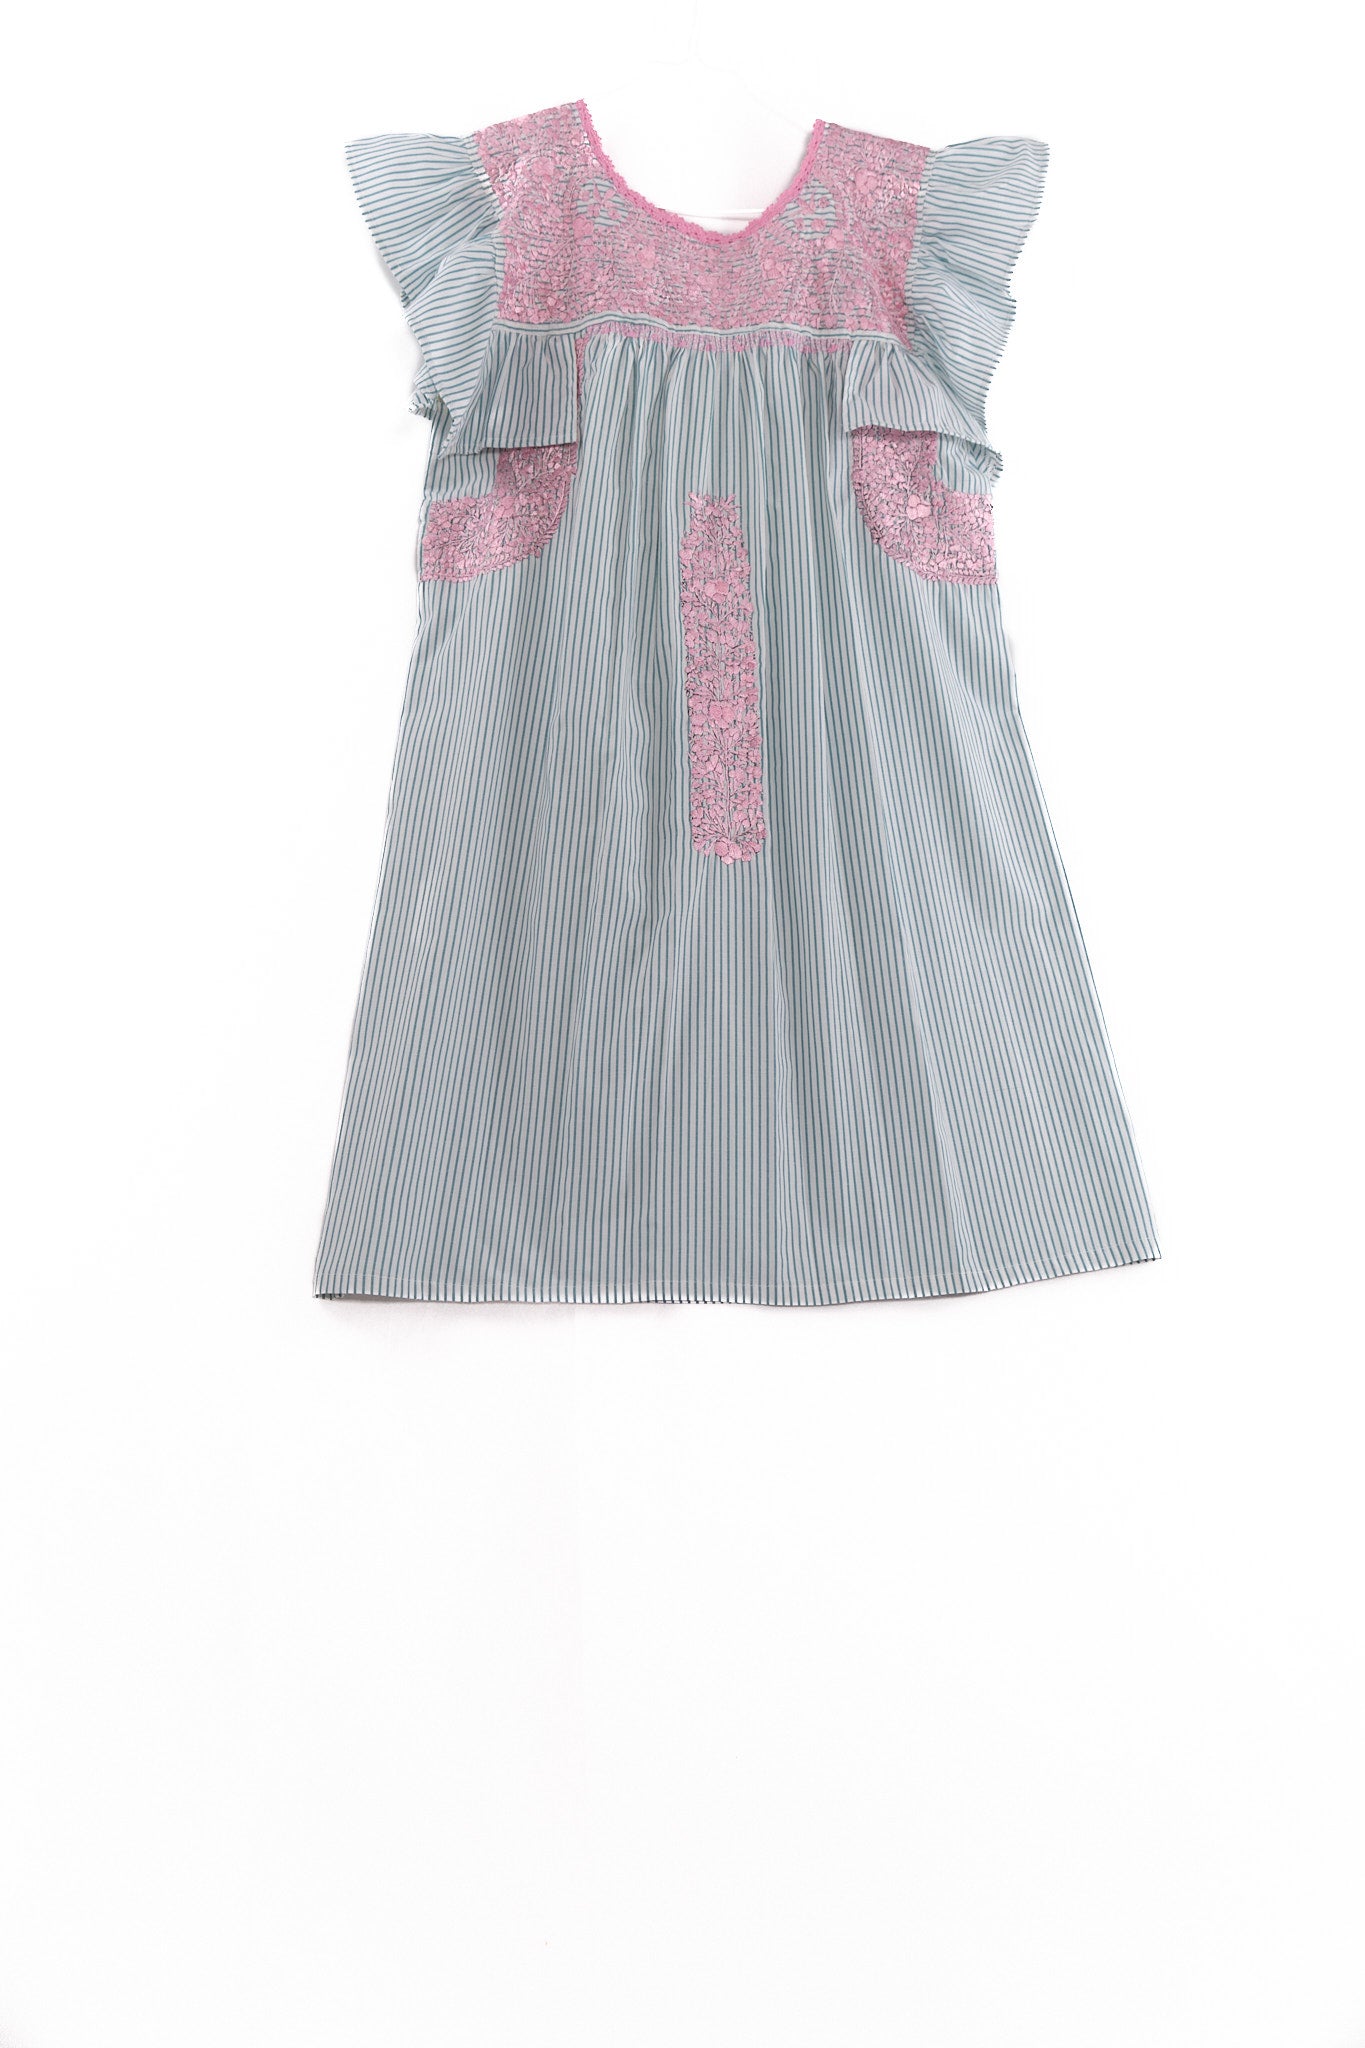 San Antonino Ruffled Dress striped with pink embroidery GARMENT